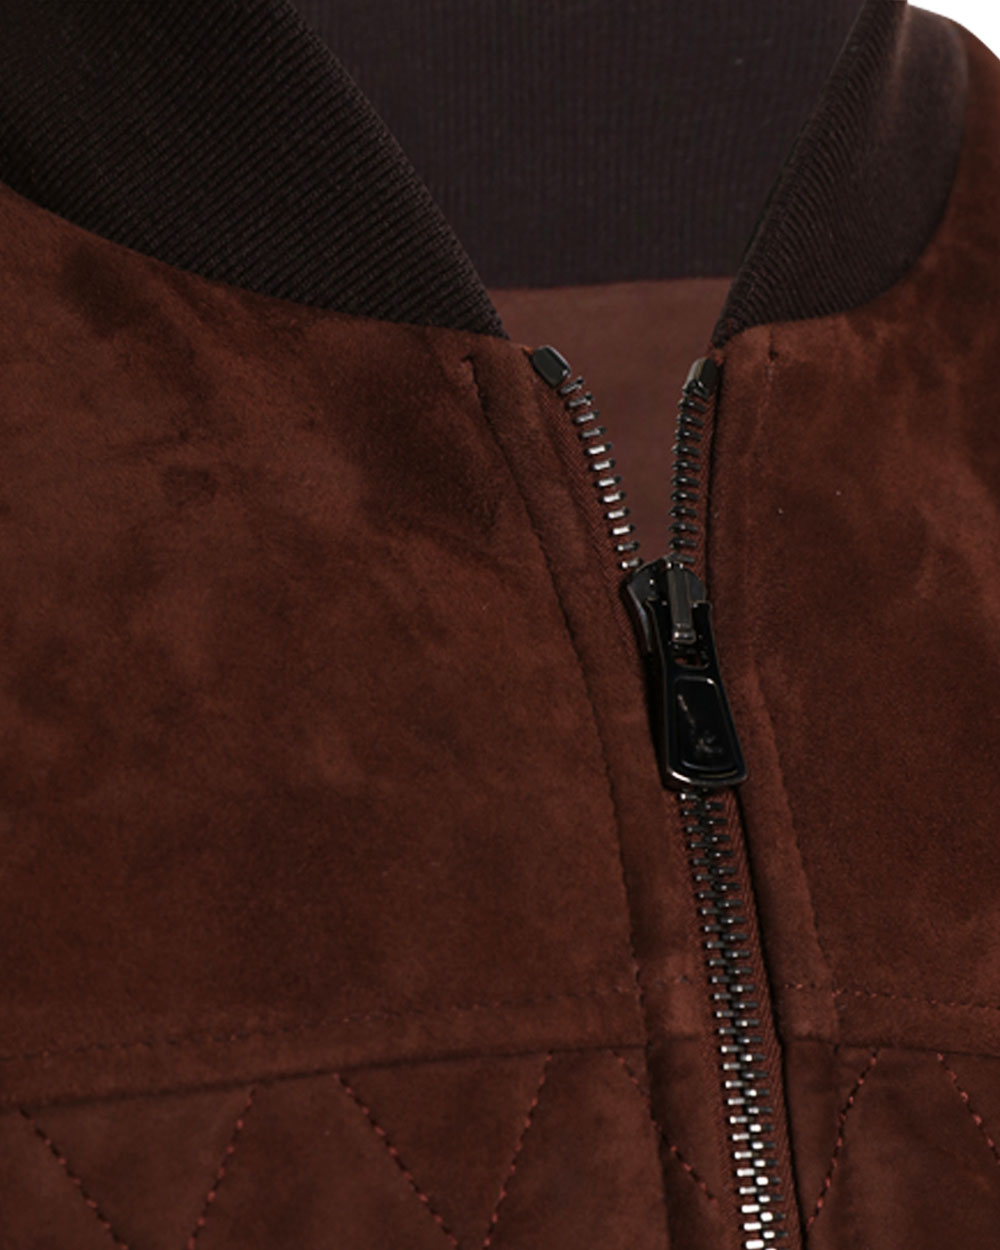 Brown Quilted Suede Padded Vest